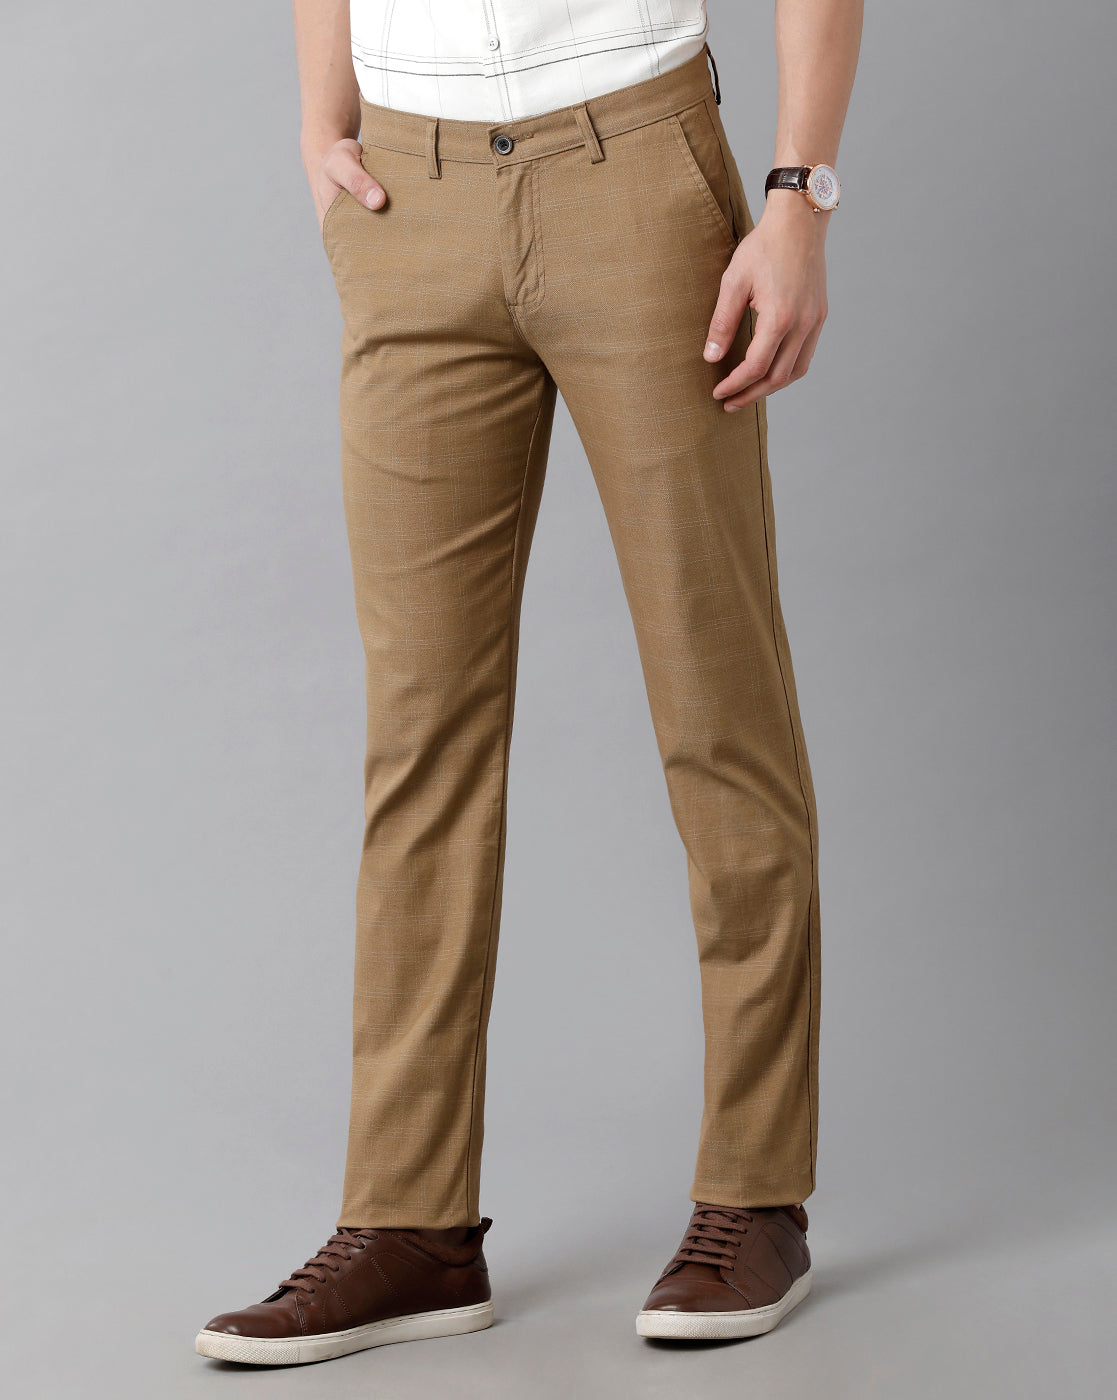 Charisma Relaxed Straight Pants in Khaki Twill by 34 Heritage - Hansen's  Clothing